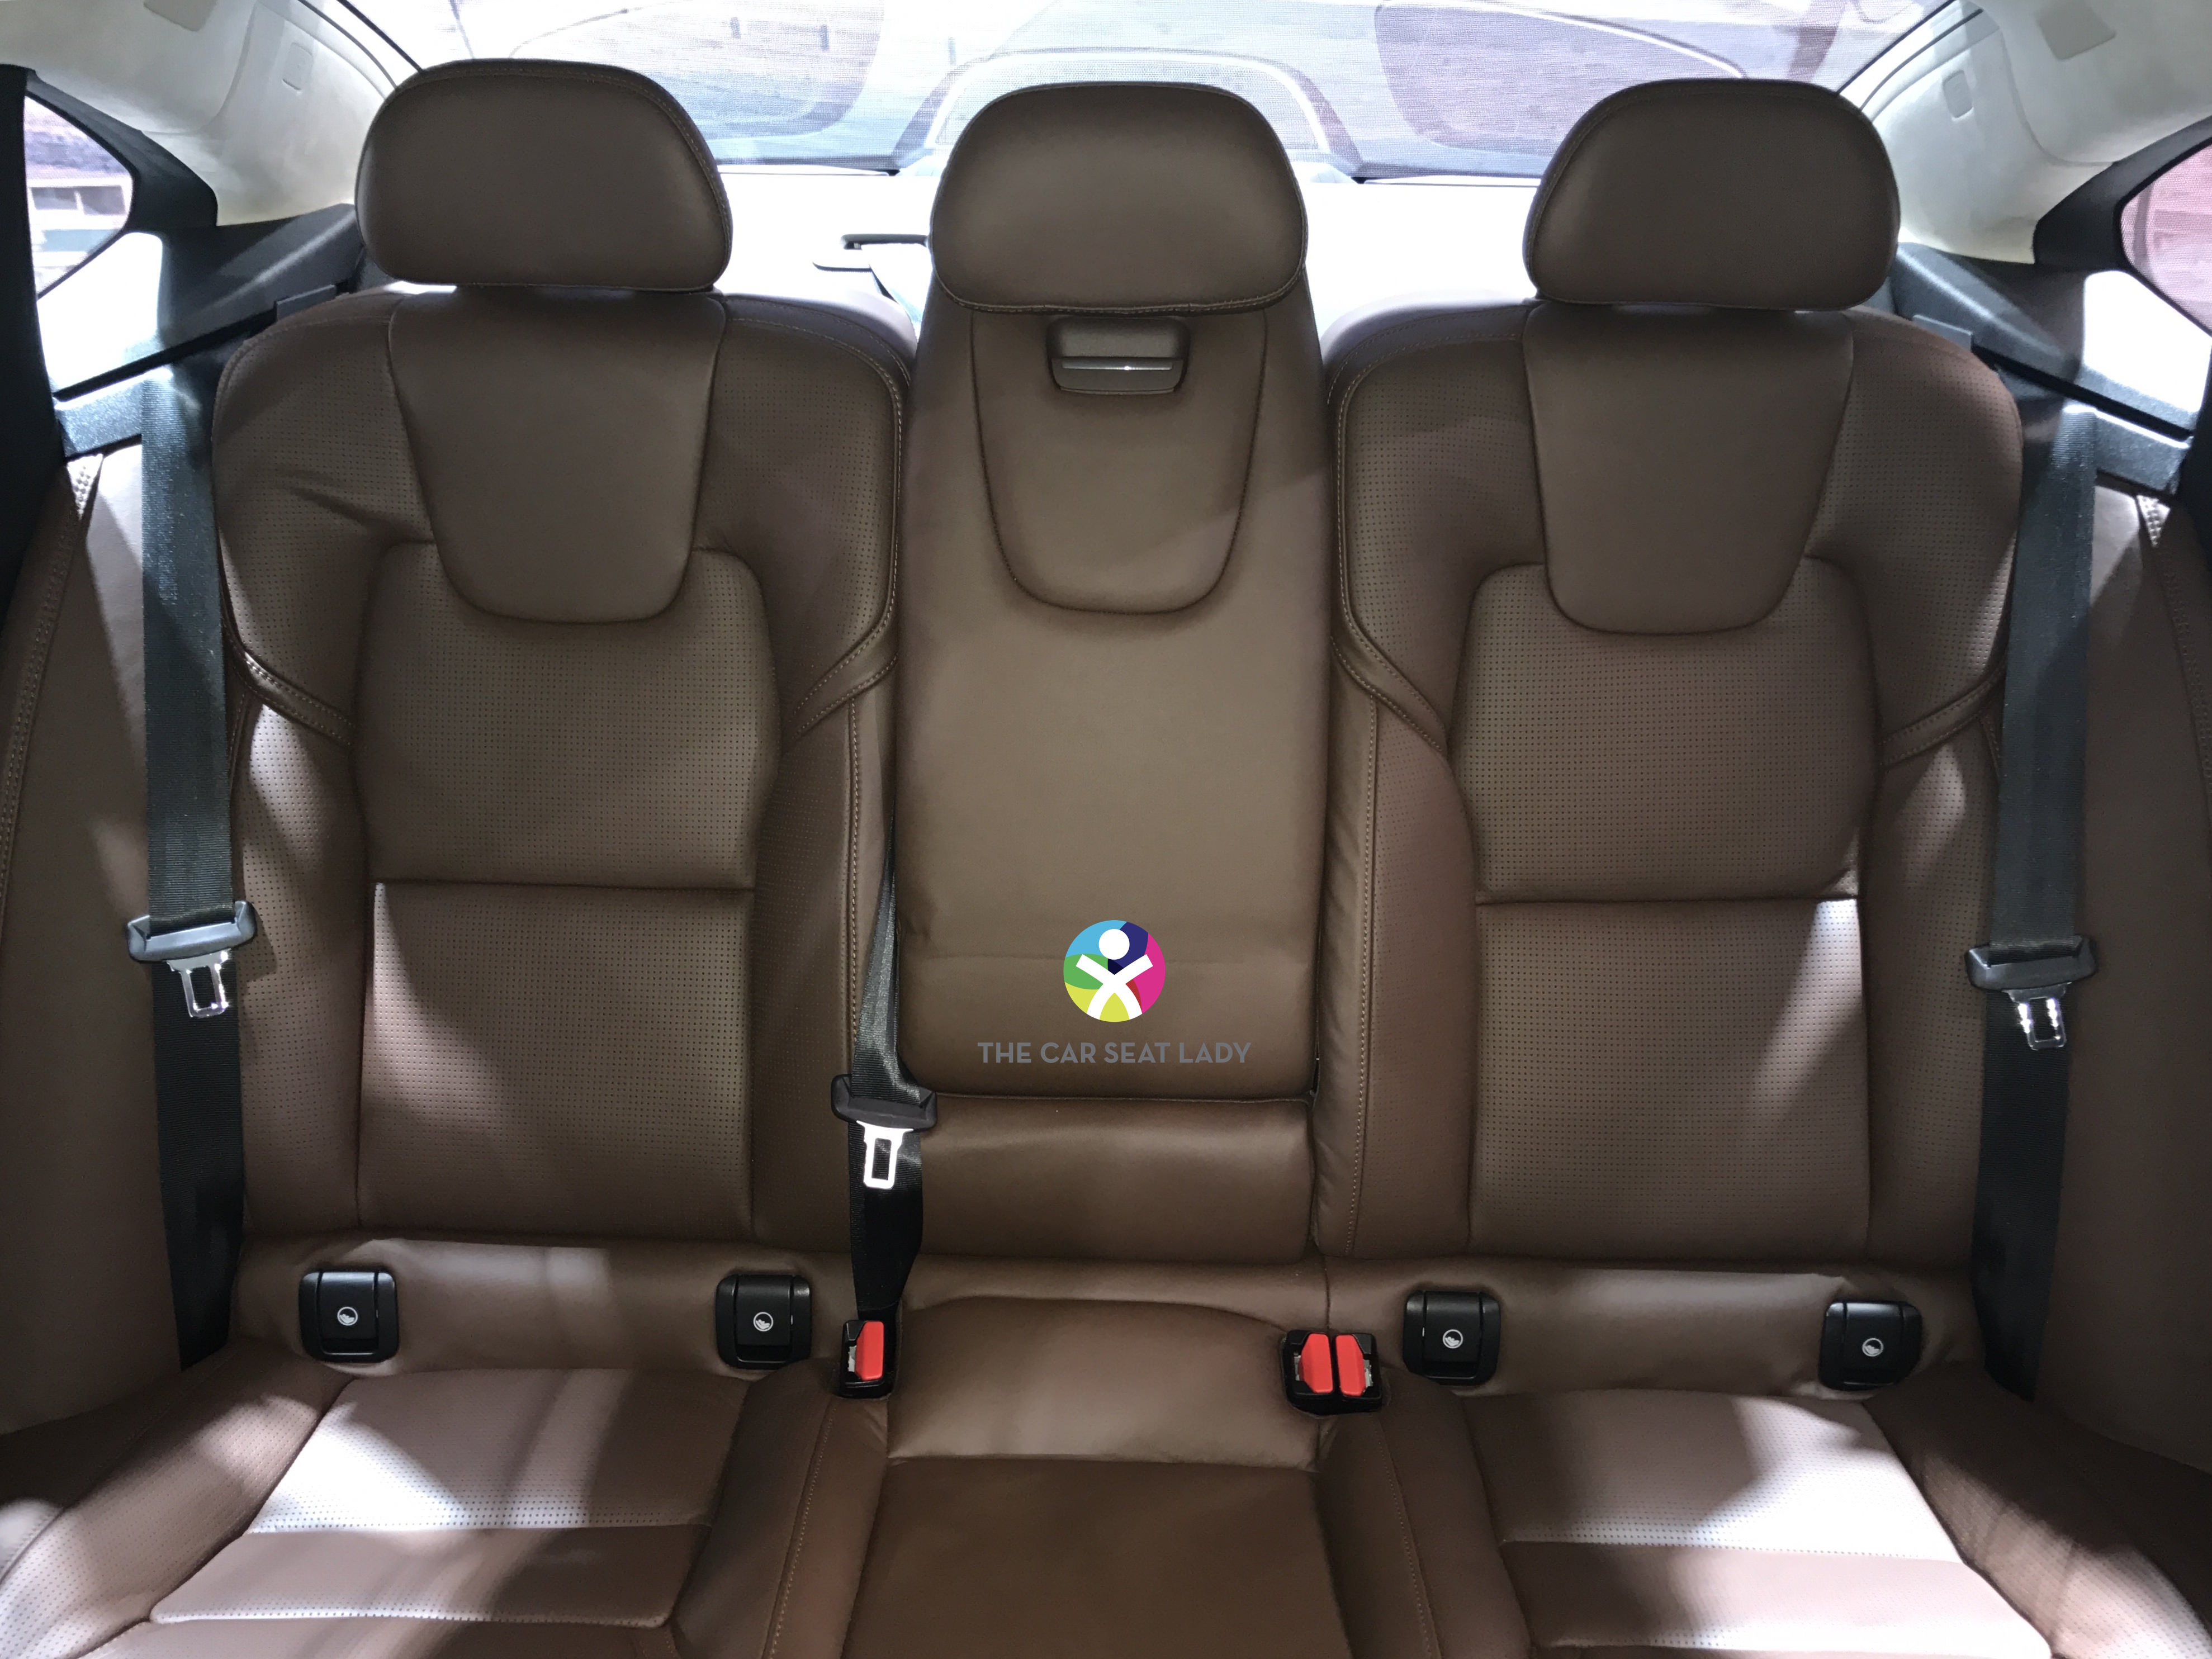 Waterproof car seat protector for busy parents with muddy kids